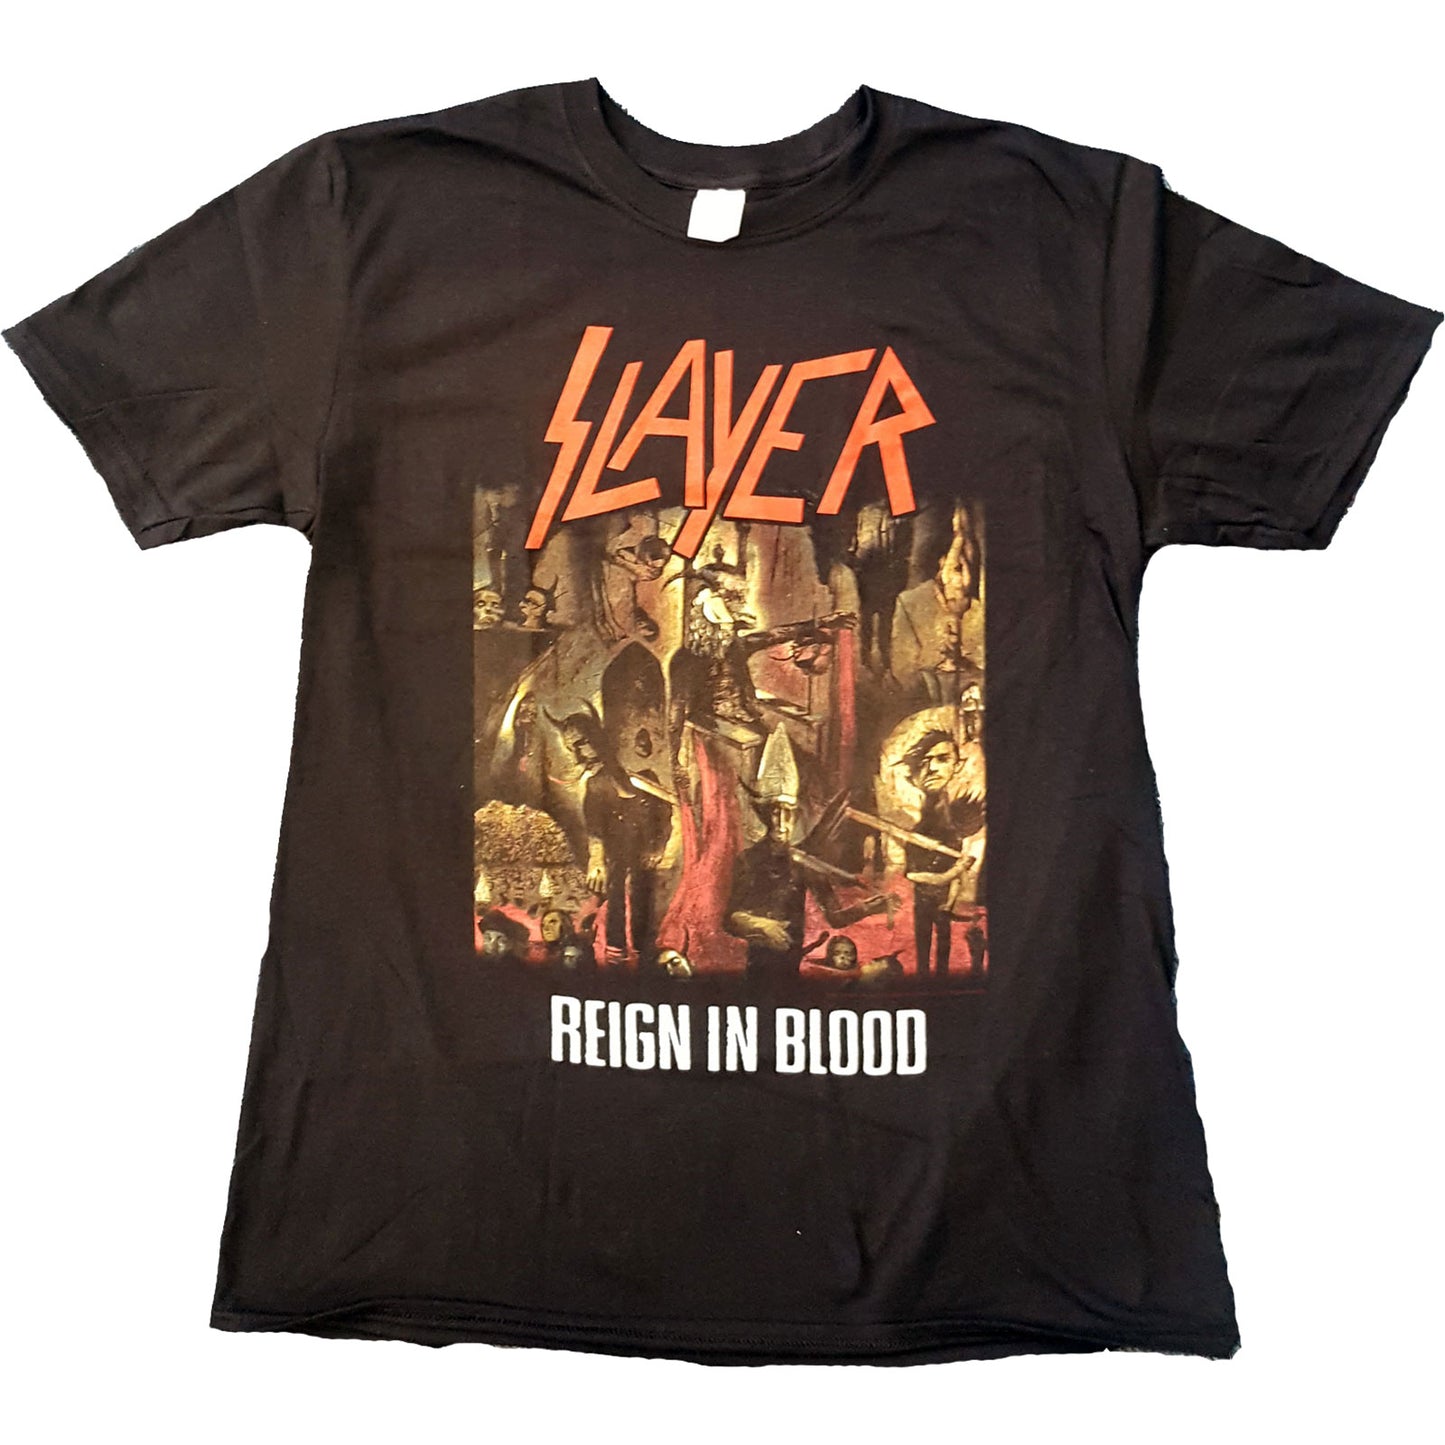 Slayer T-Shirt: Reign in Blood